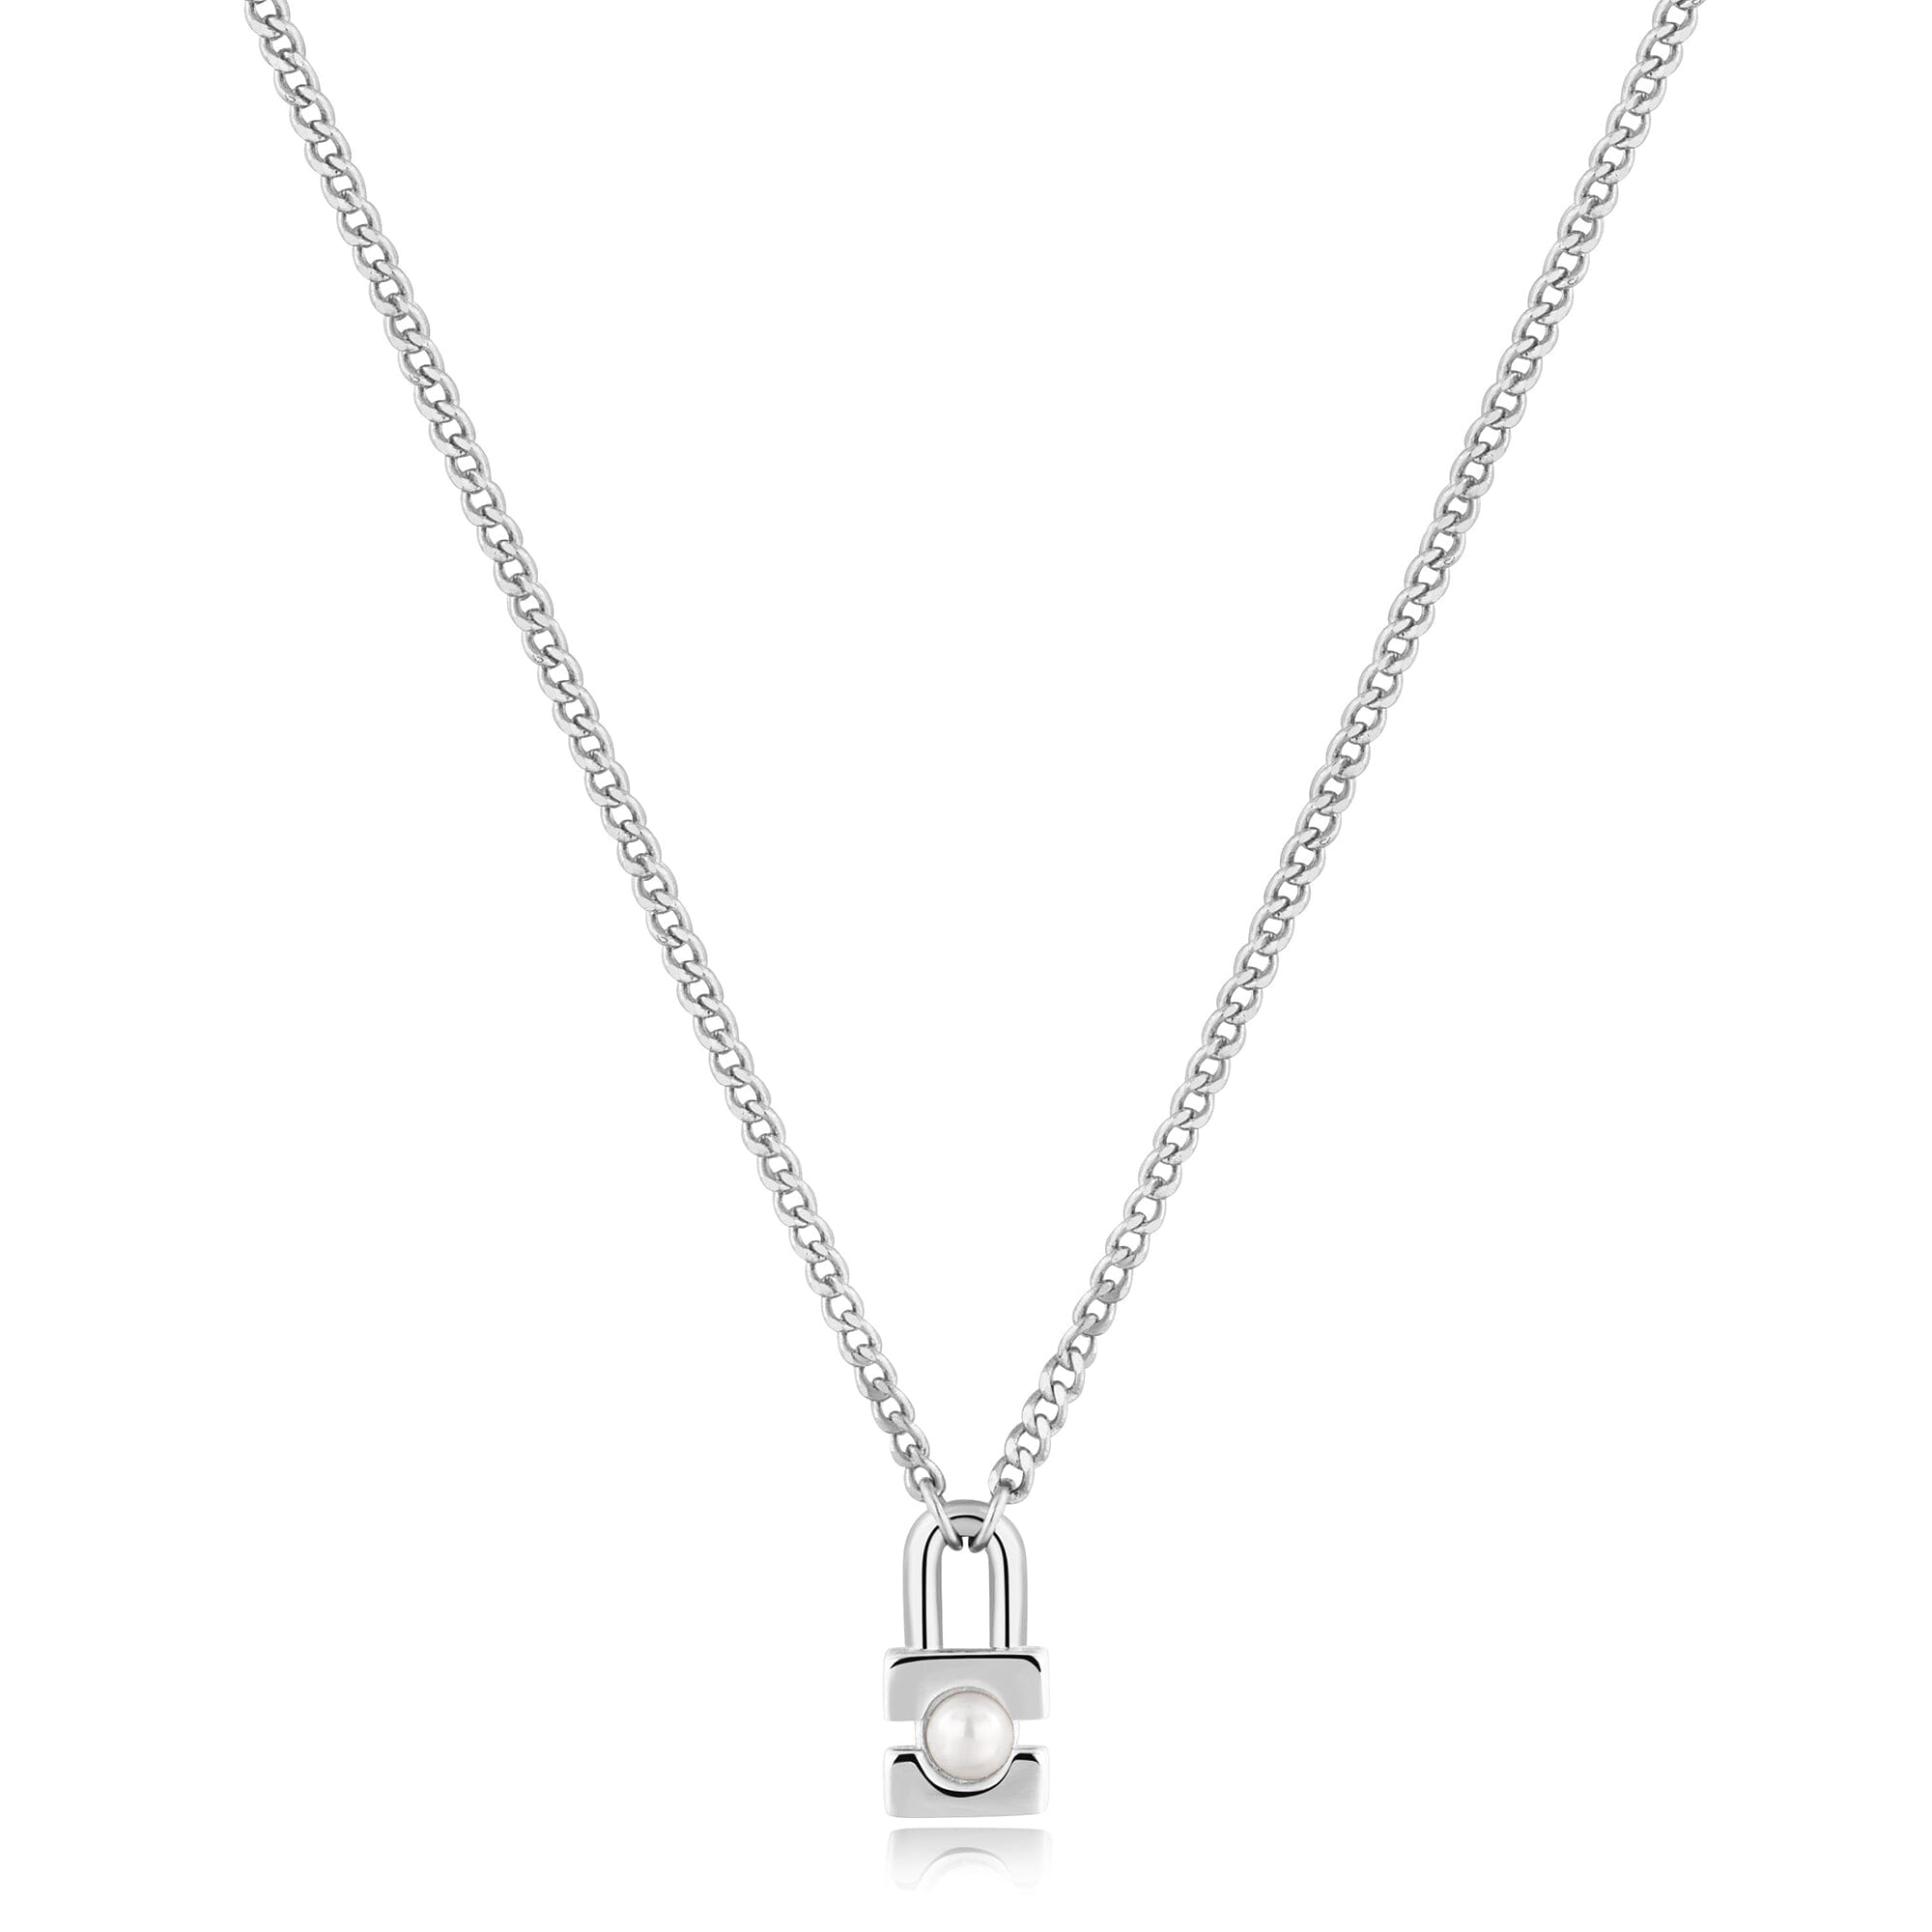 Ania Haie Silver Pearl Padlock Necklaces Necklaces Ania Haie 